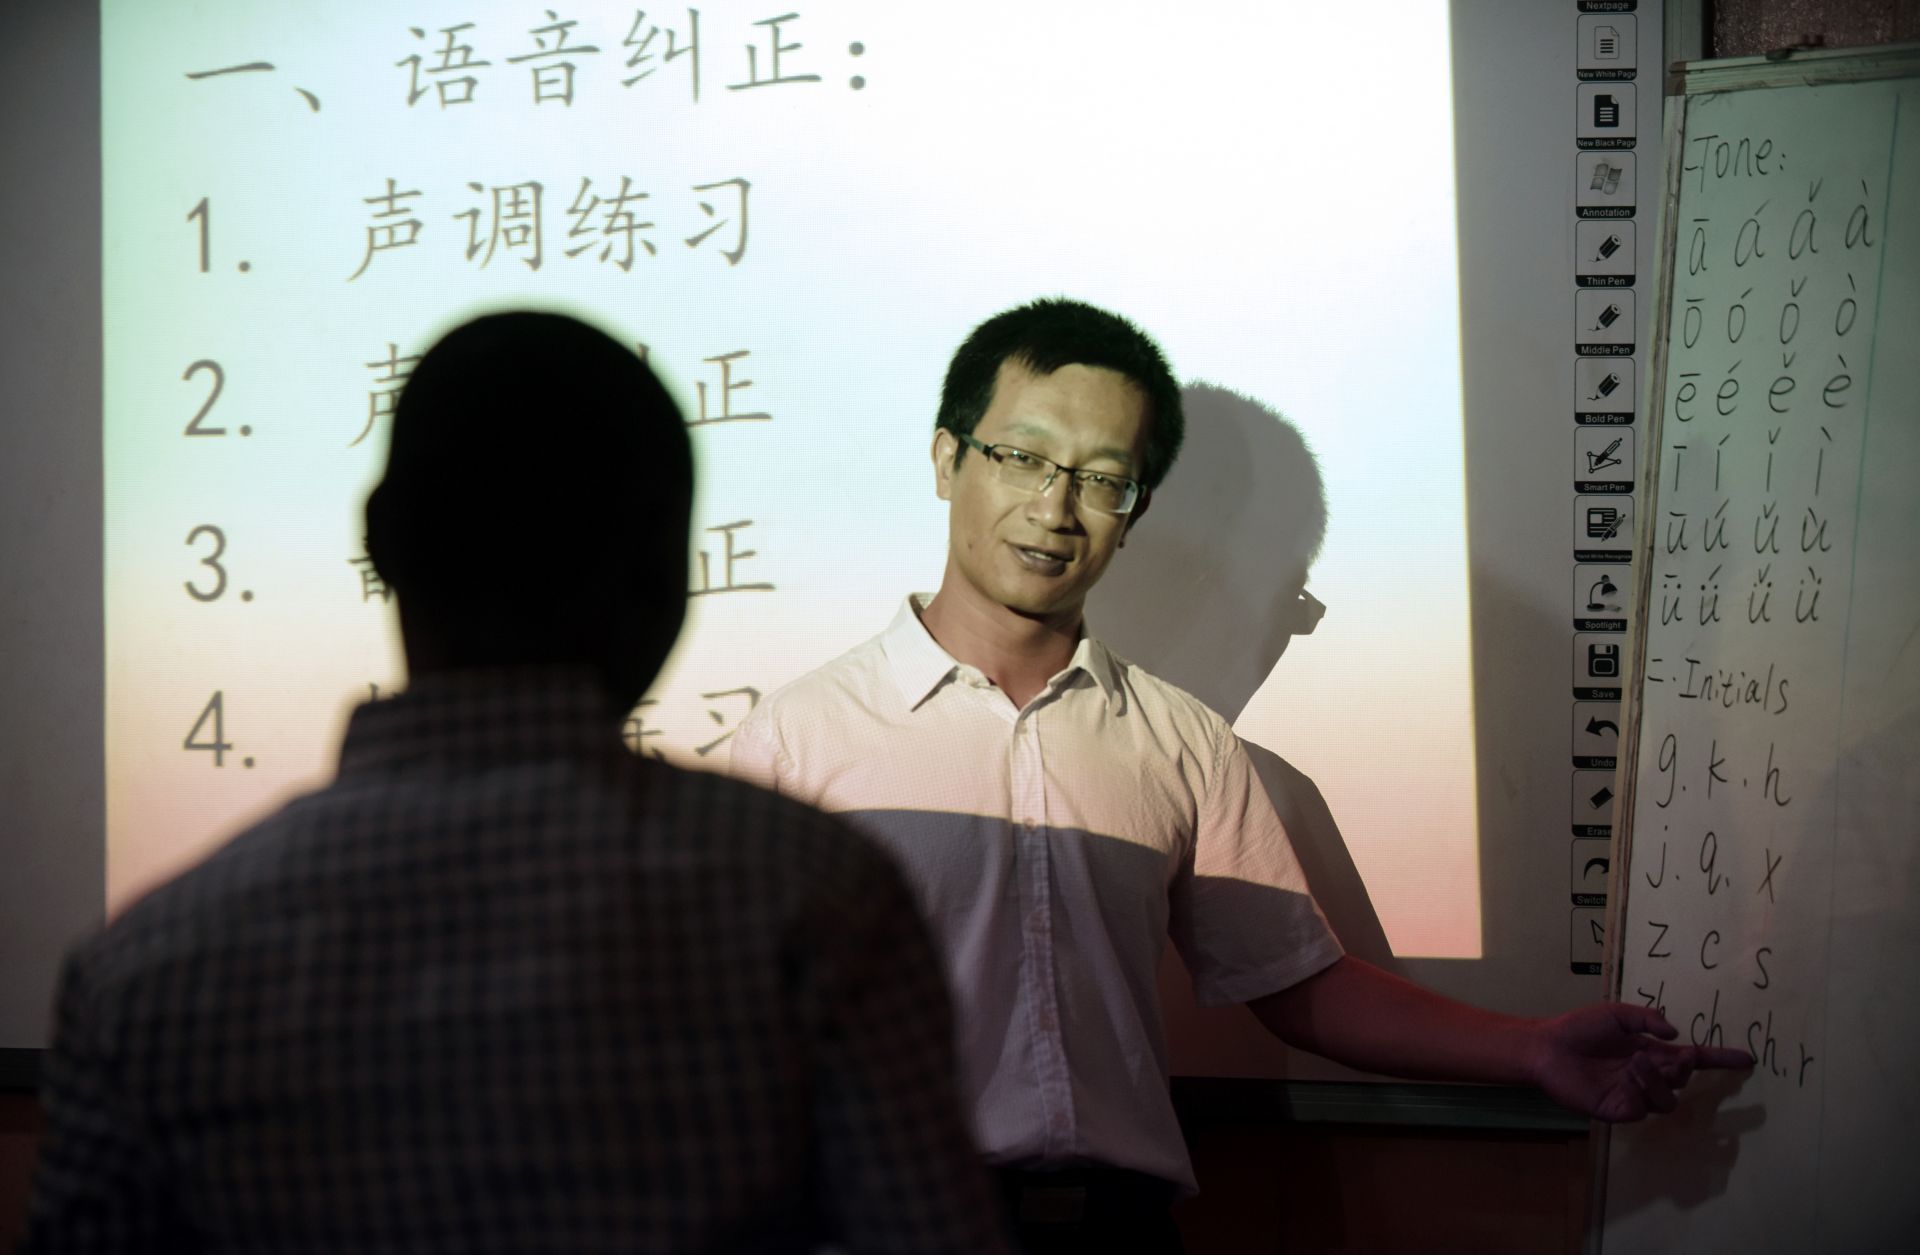 An instructor gives a lesson in Chinese language at a Confucius Institute in Lagos, Nigeria, in April 2016.